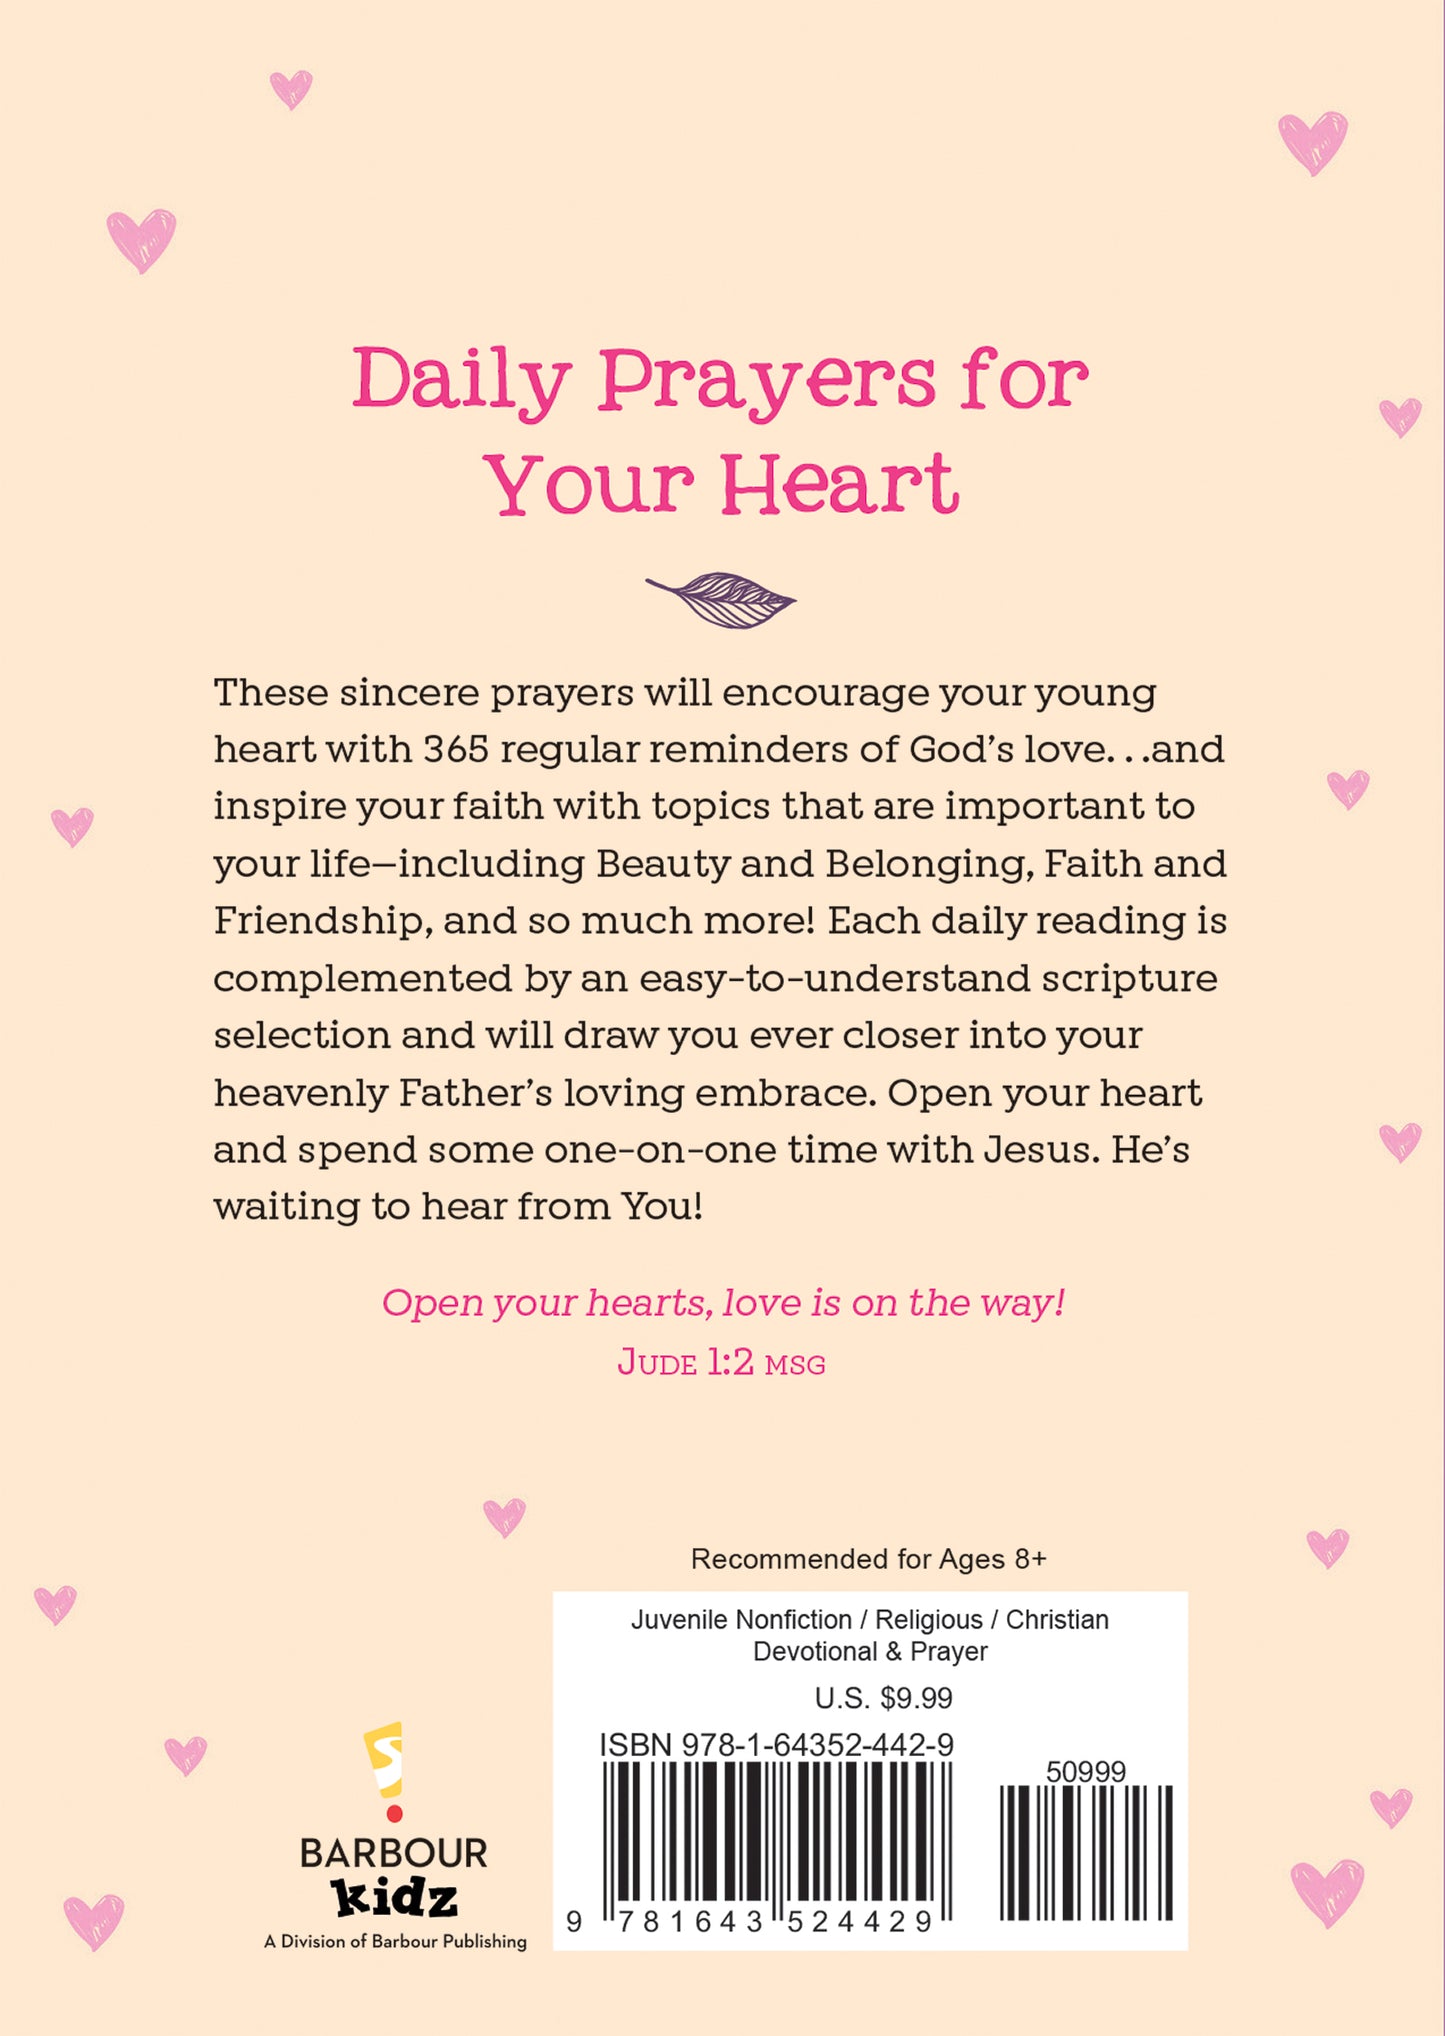 Daily Prayers for a Girl's Heart - The Christian Gift Company